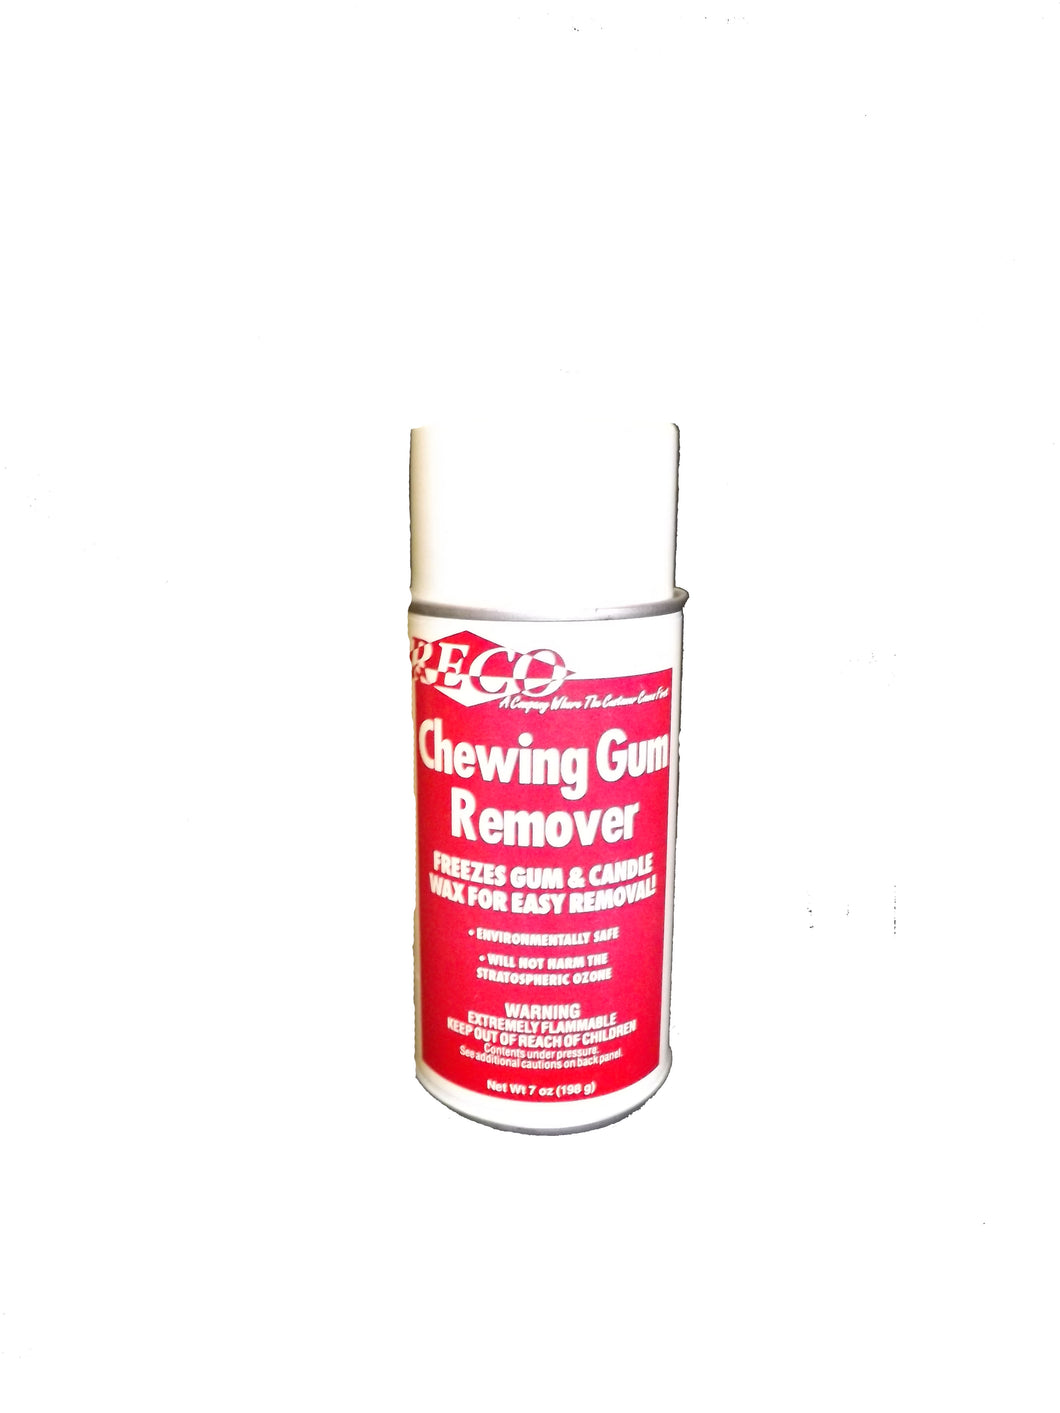 RECO CHEWING GUM REMOVER